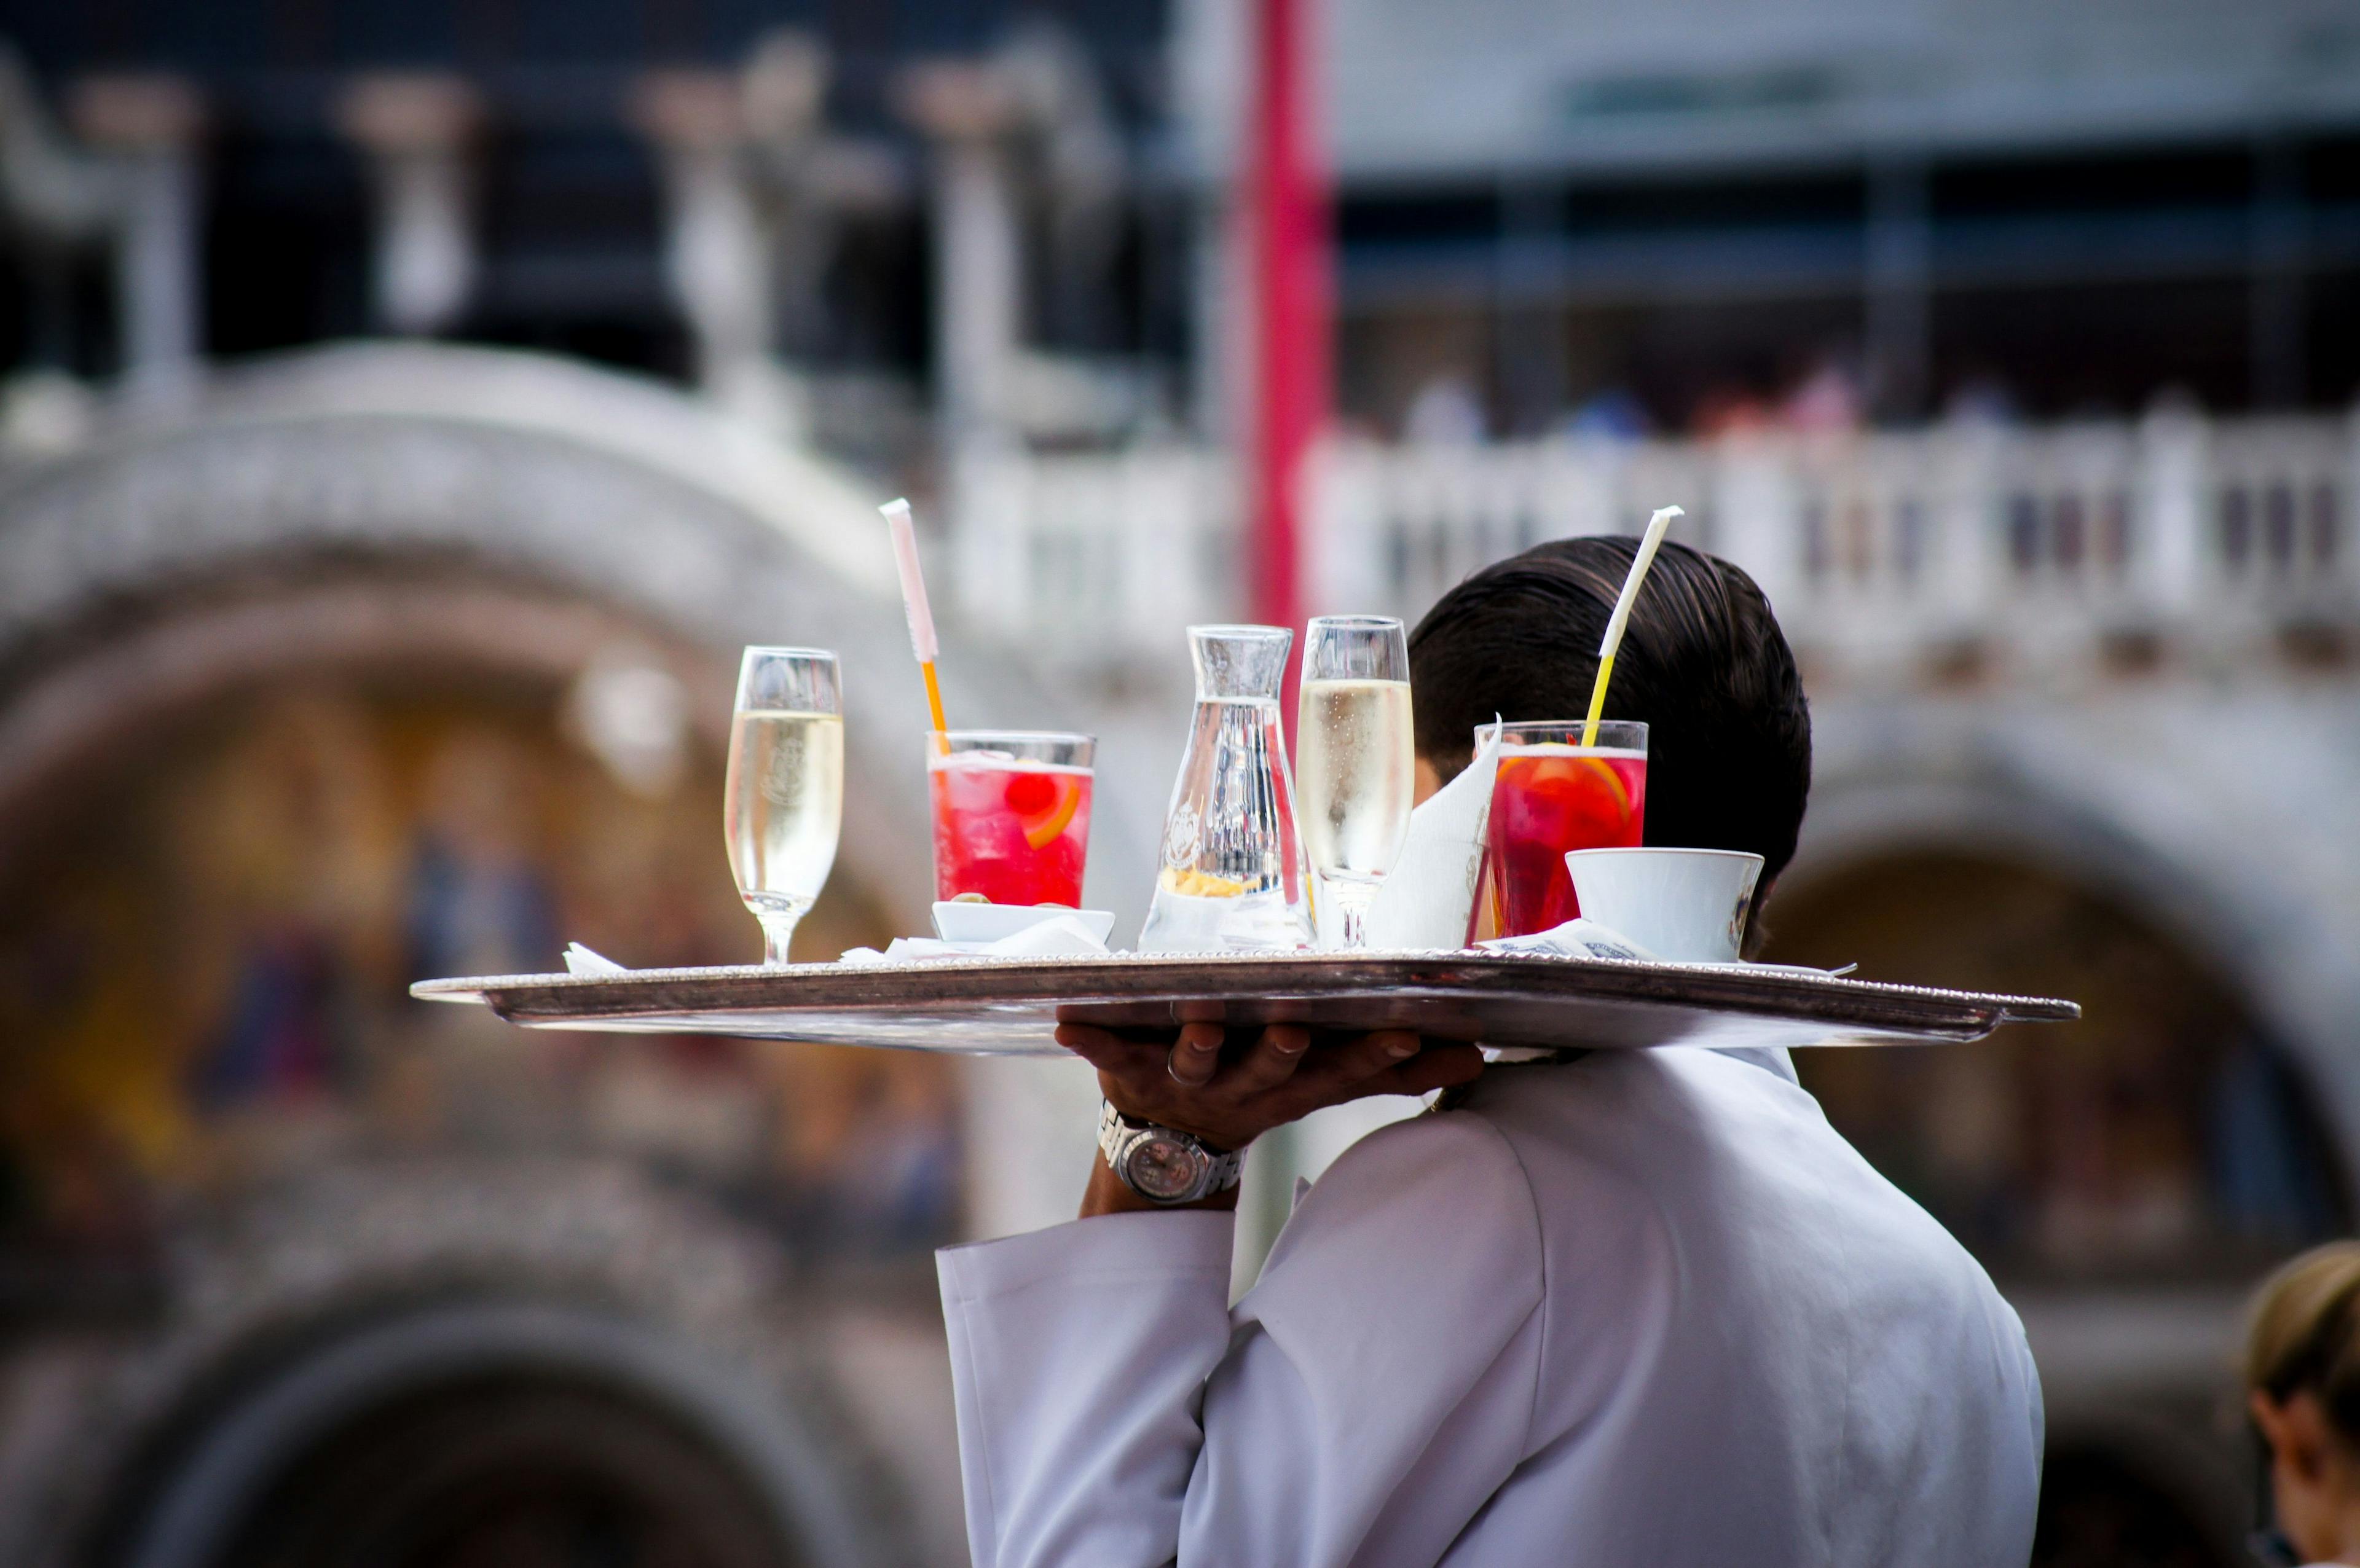 A waiter race will be held in Luxembourg